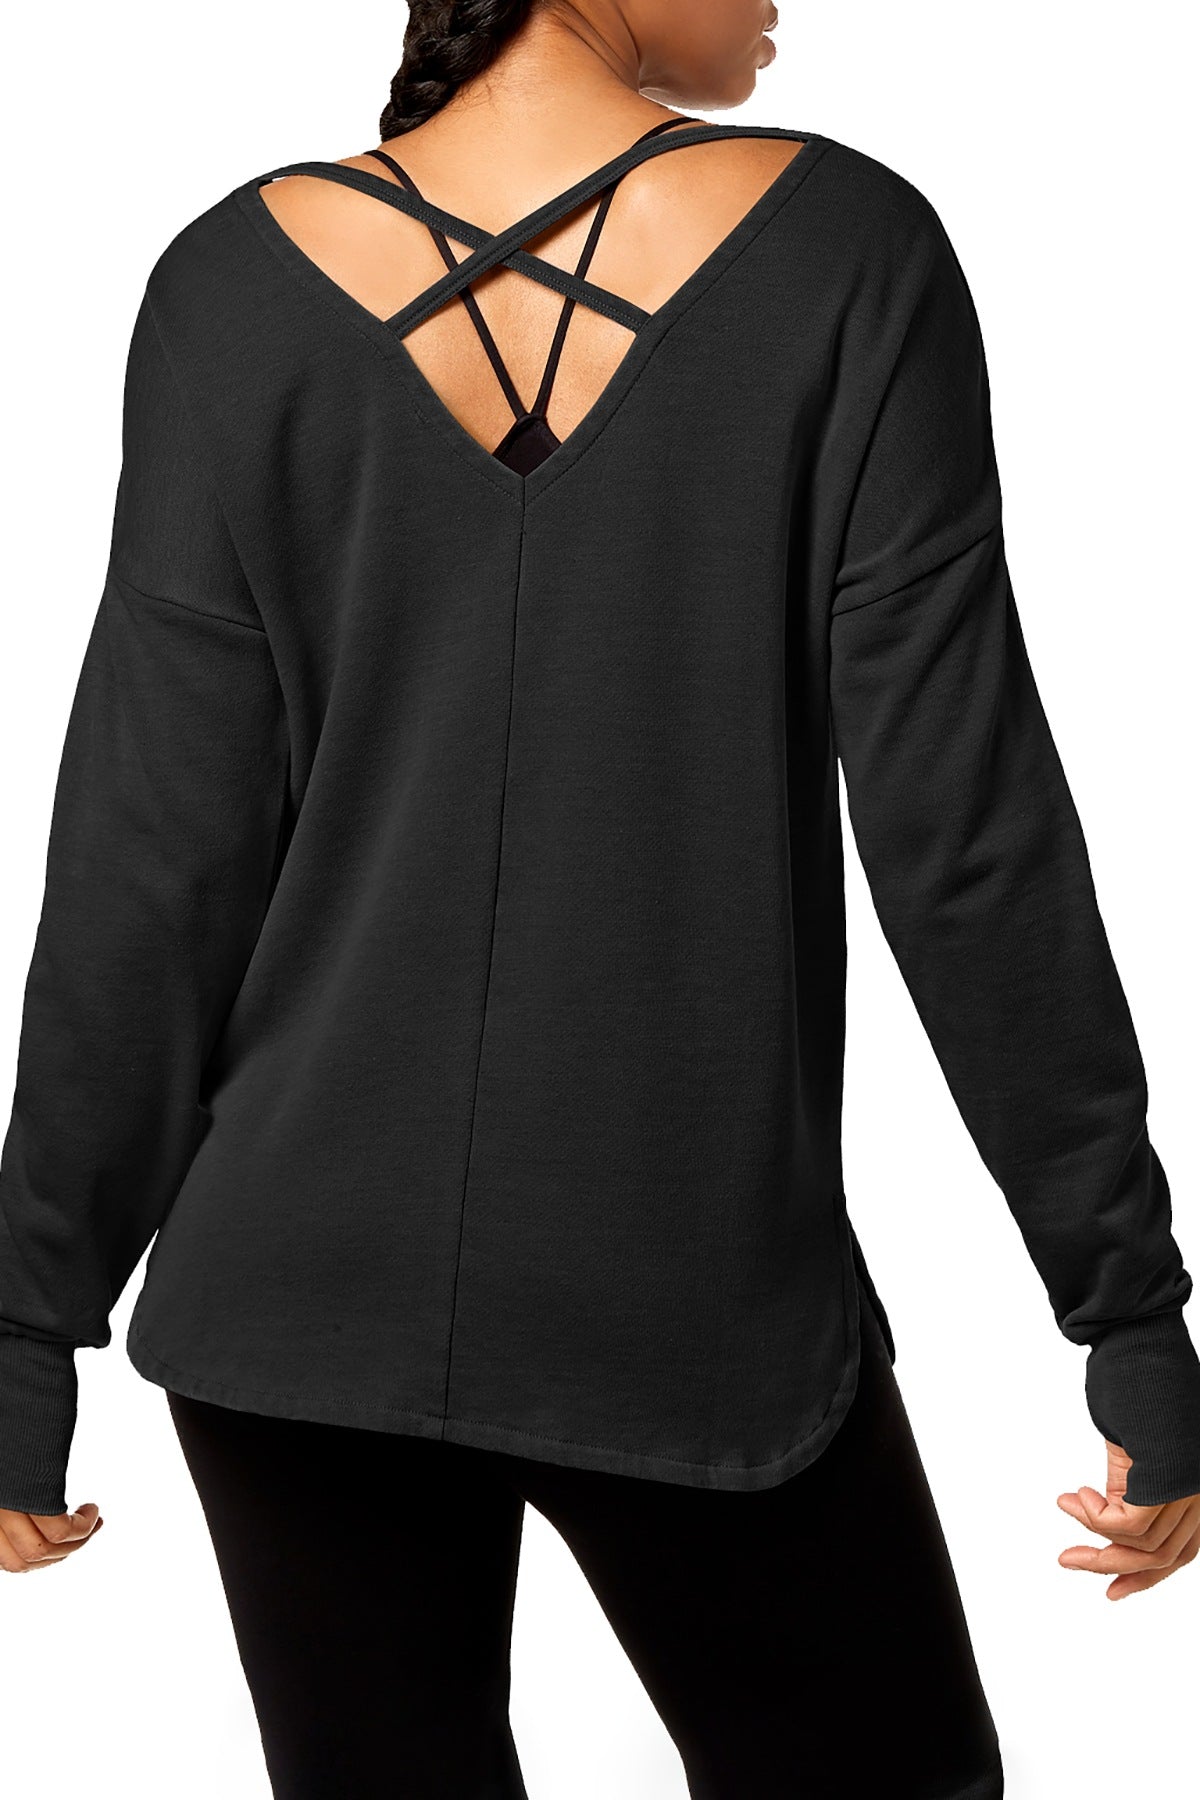 Ideology Noir Black Graphic Strappy Back Long Sleeve Top